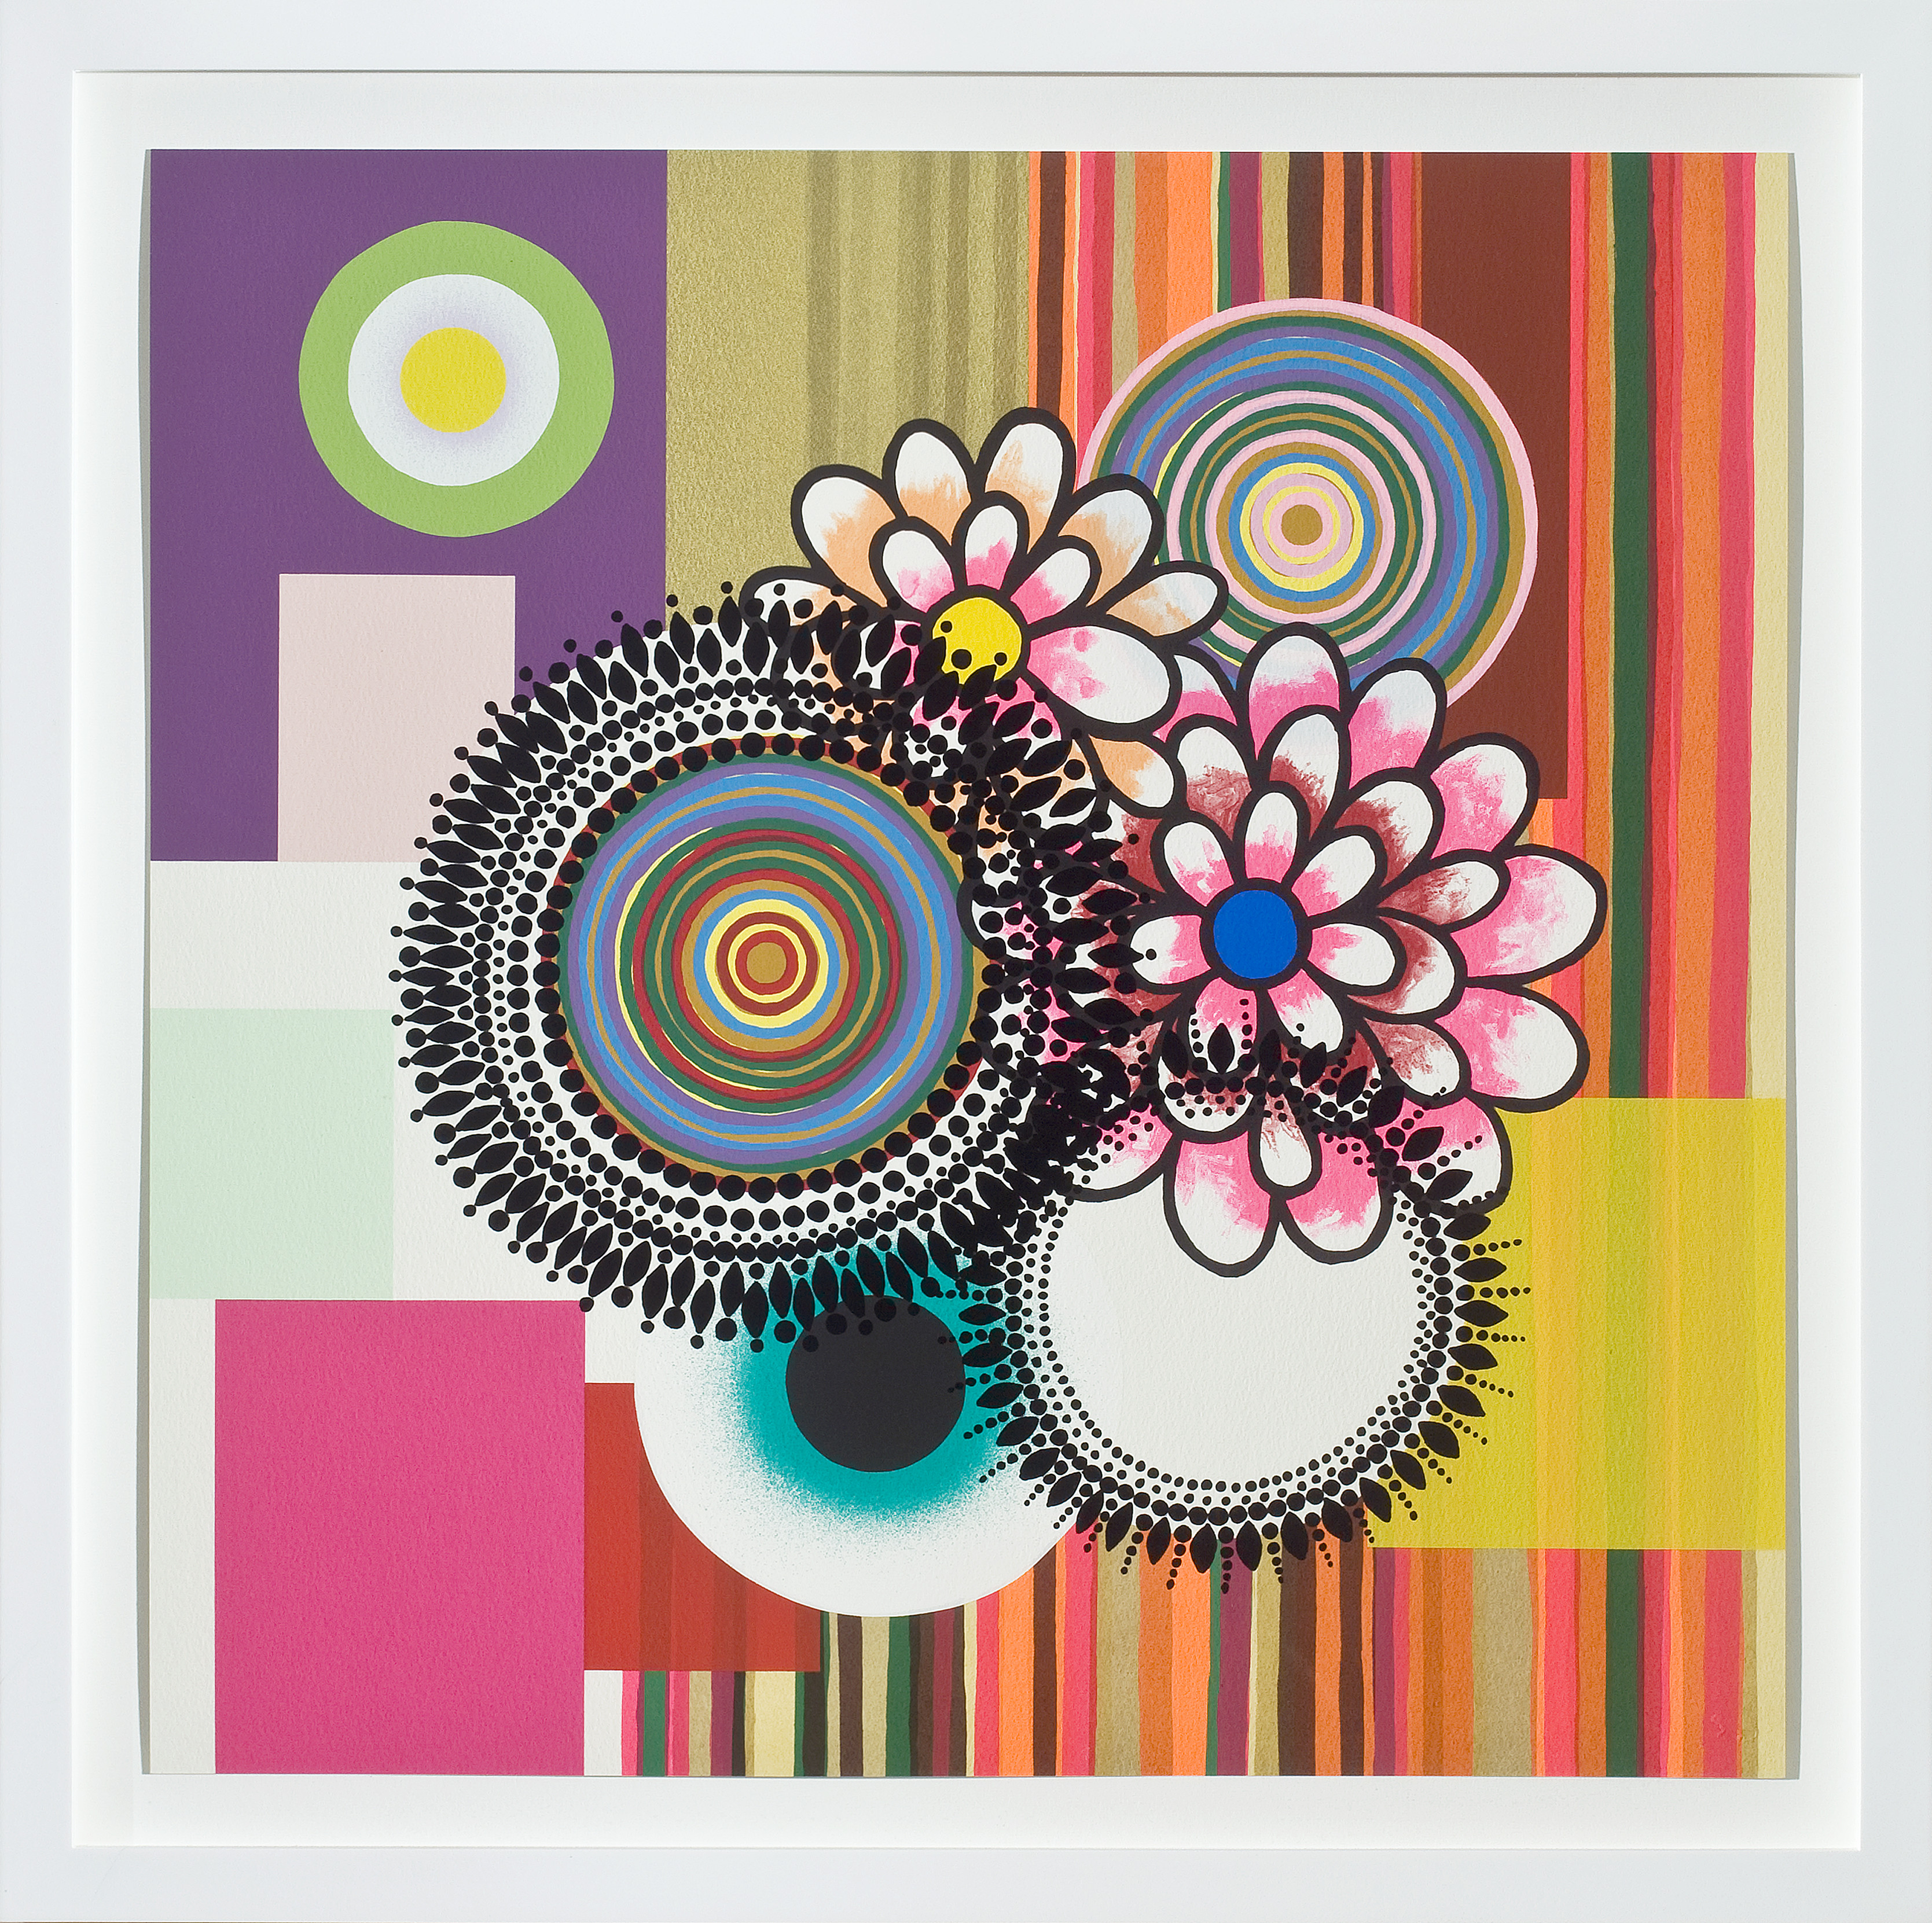 A square, vibrant print with colorful pink flowers and colorful, mandala-like circles against a geometric background of different colored rectangles and vertical stripes.